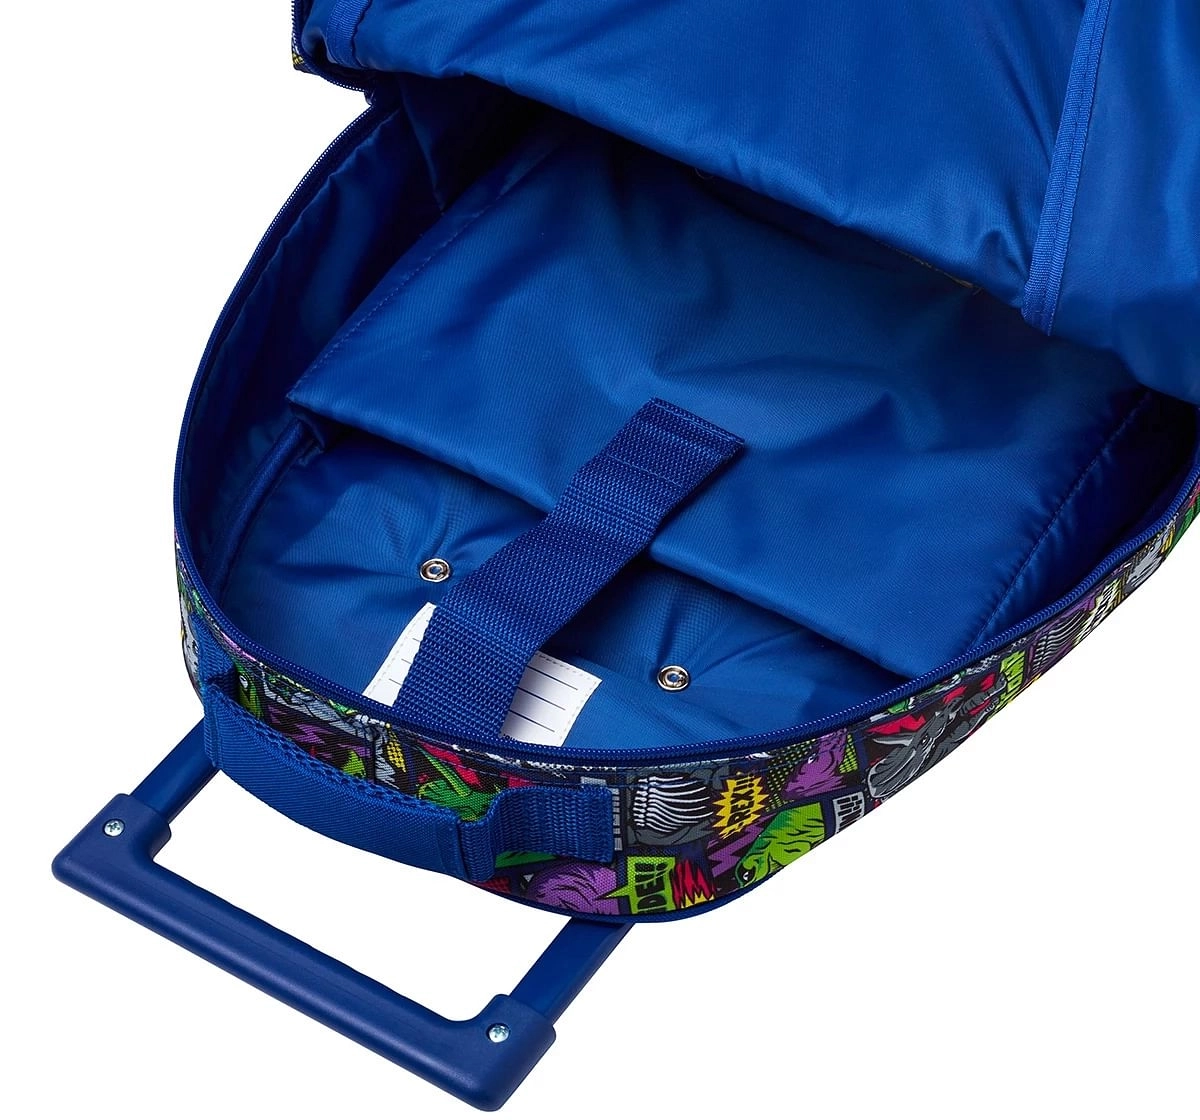 Smiggle Bright Side Trolley With Light Up Wheels for Kids 3Y+, Blue